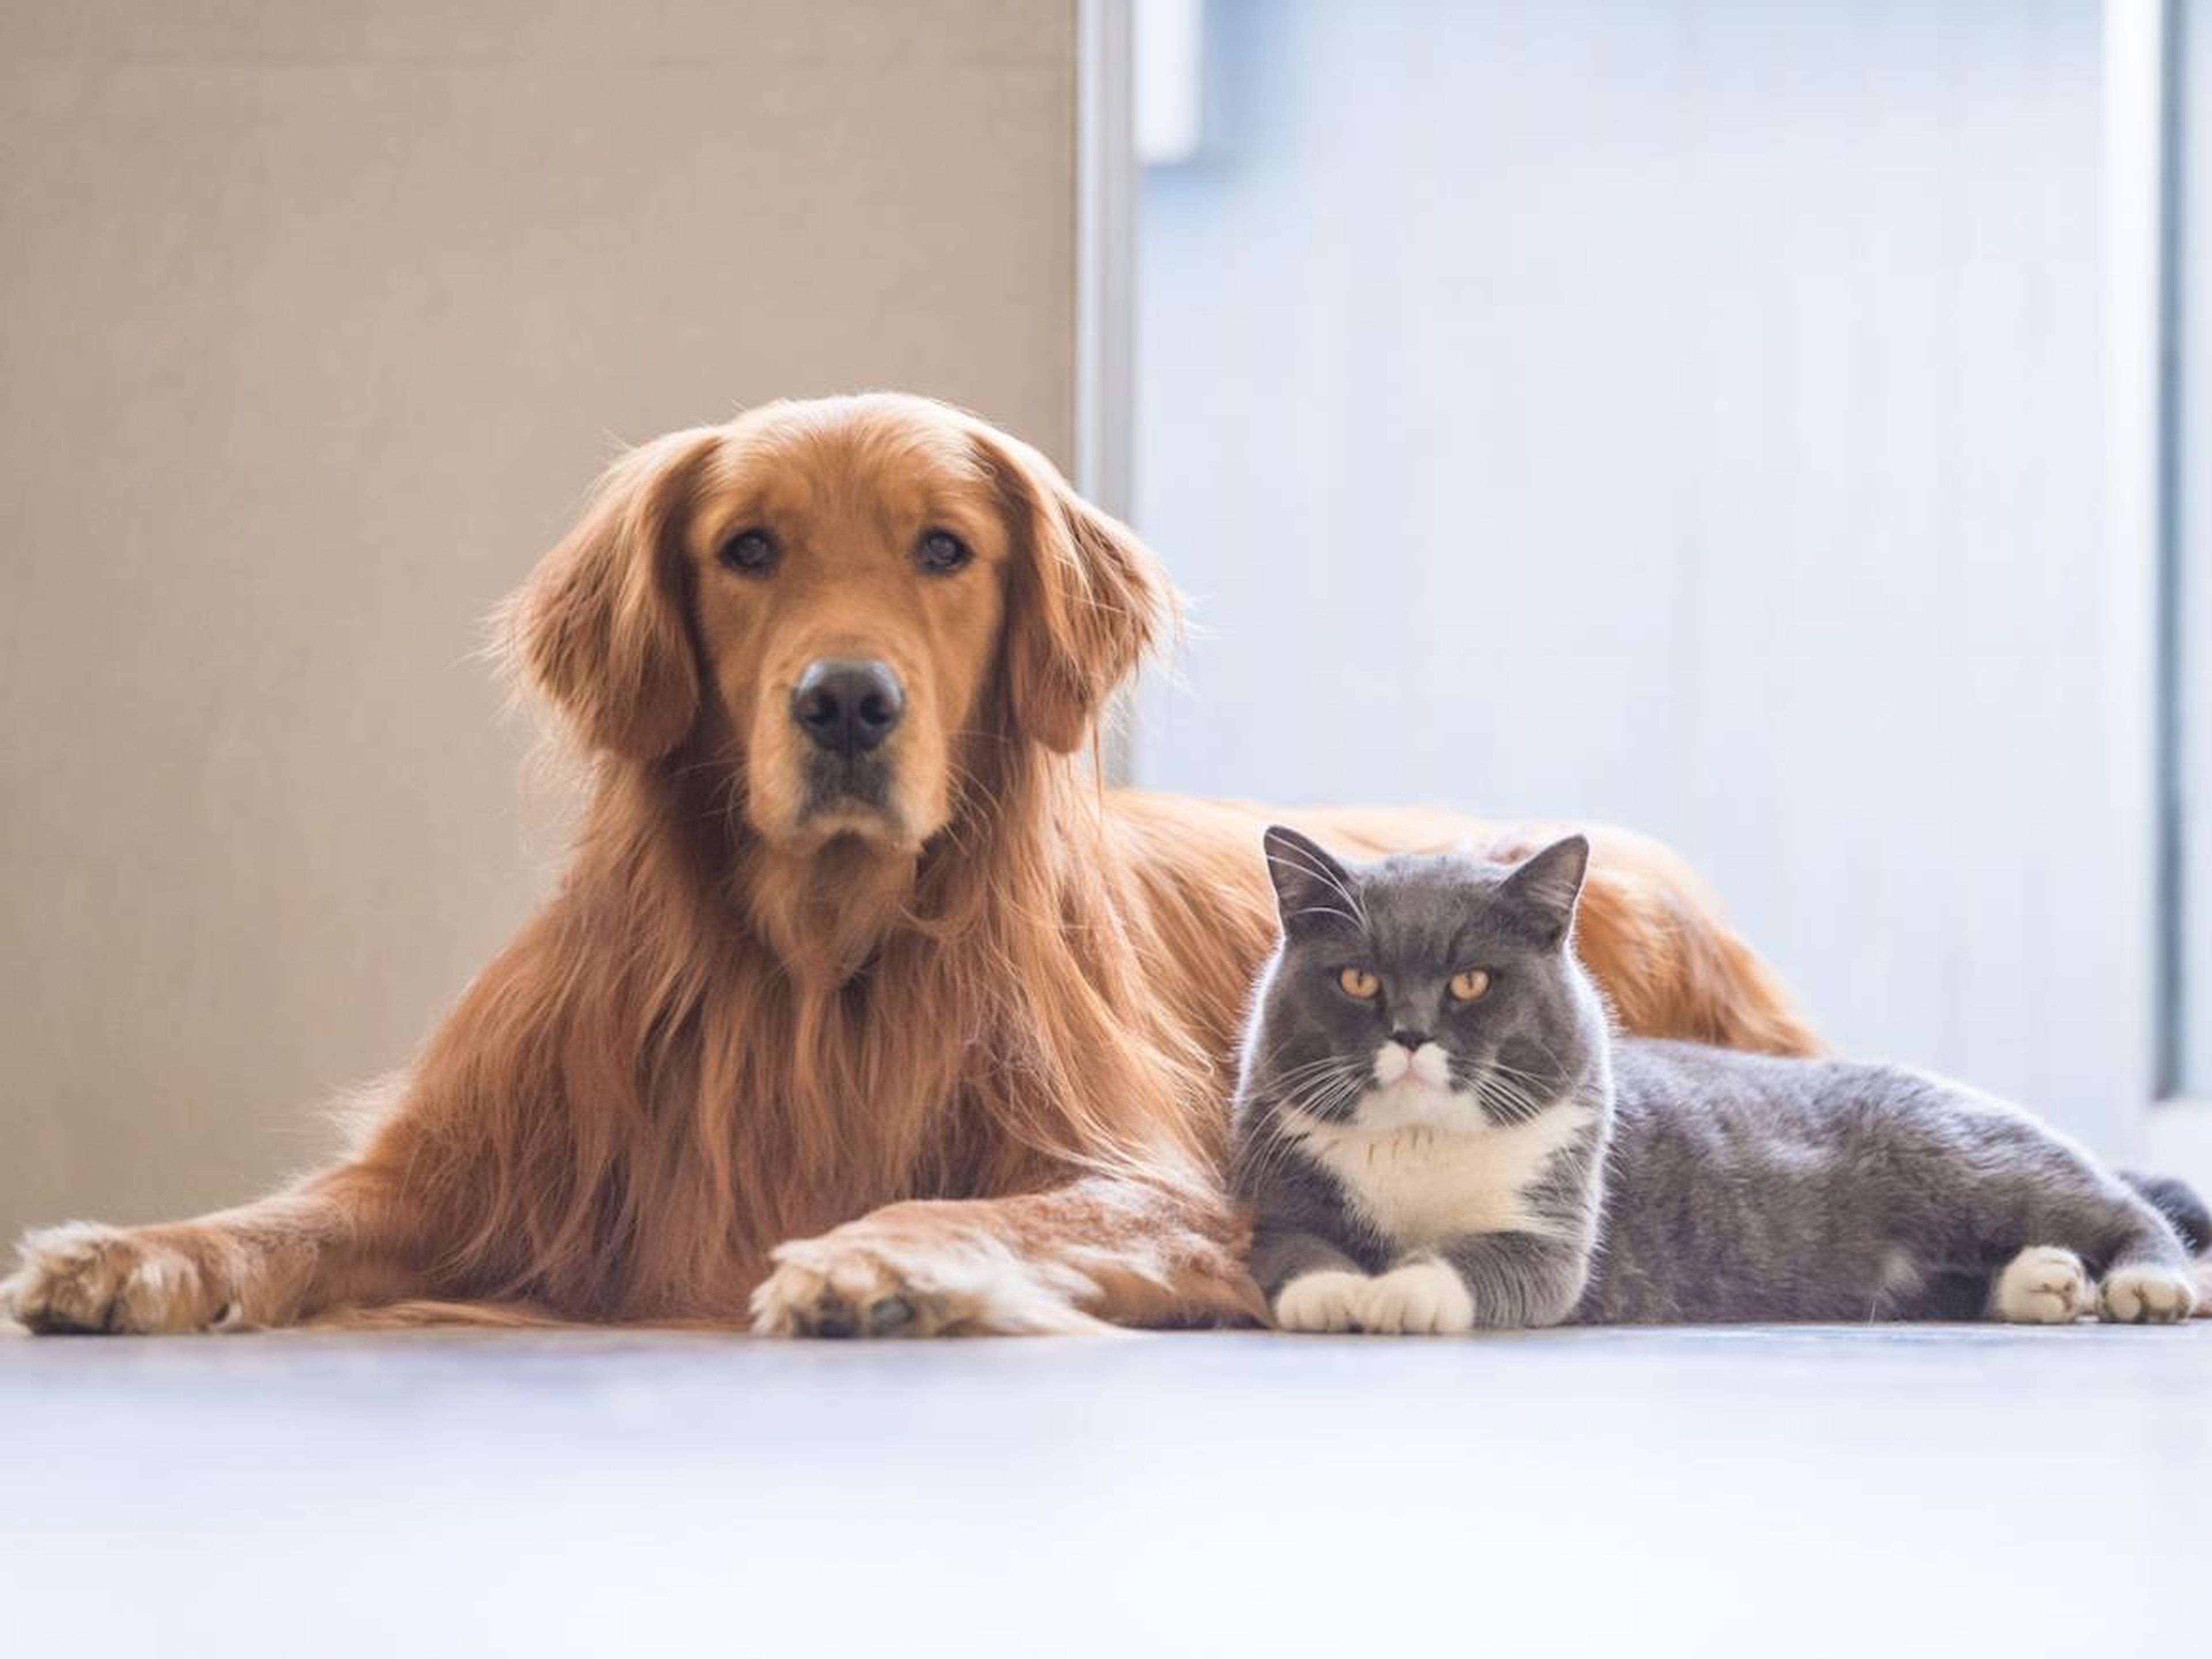 Yes, you can get sick from your cats and dogs.